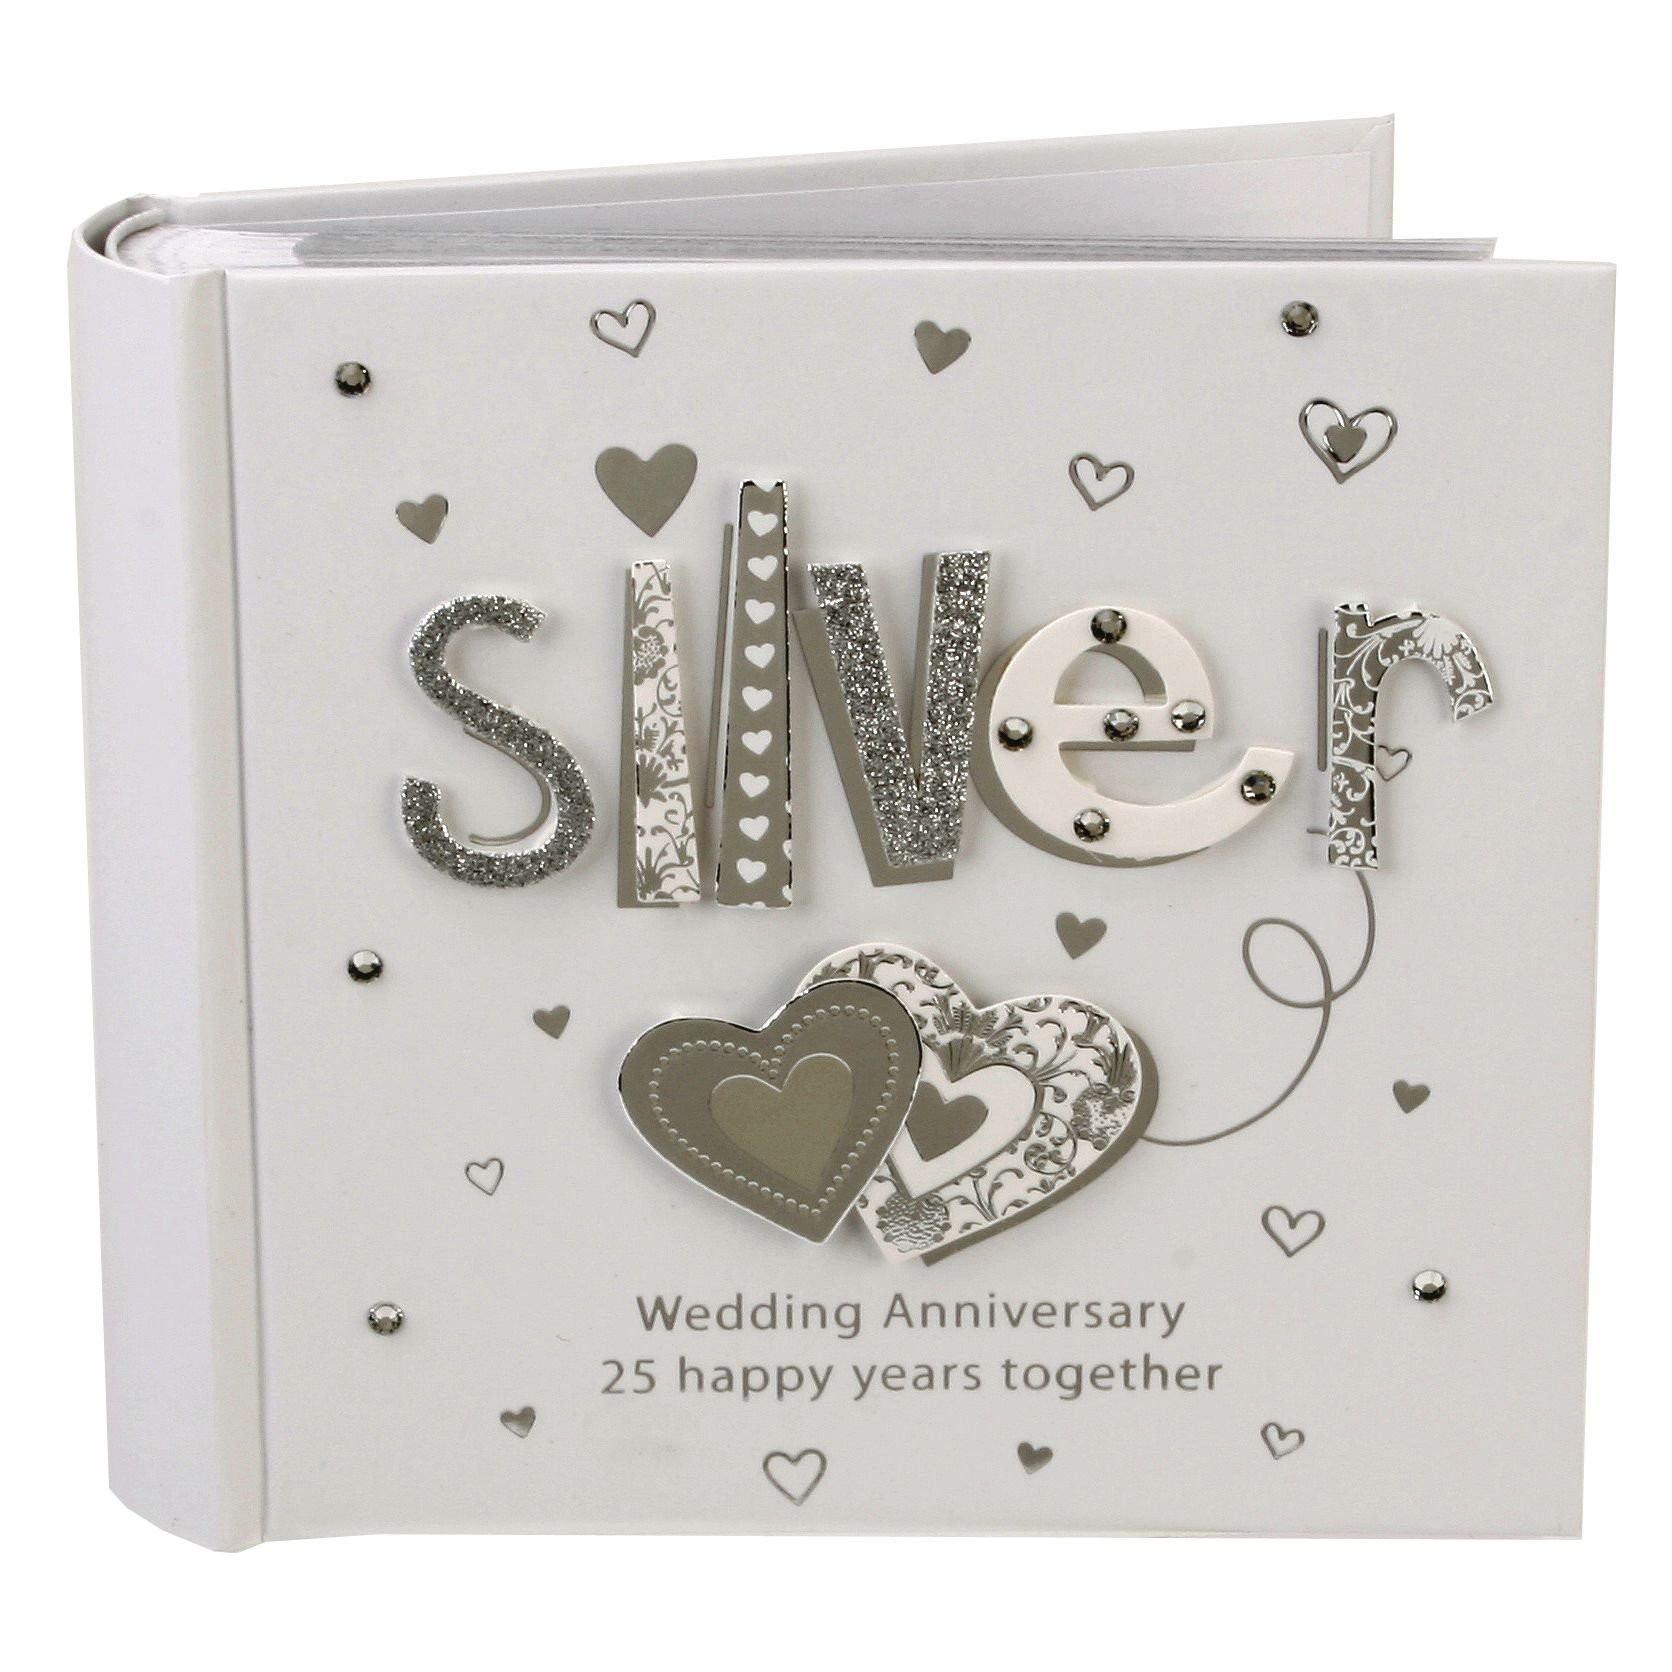 25Th Wedding Anniversary Gift Ideas For Parents
 10 Stylish Gift Ideas For 25Th Anniversary 2020